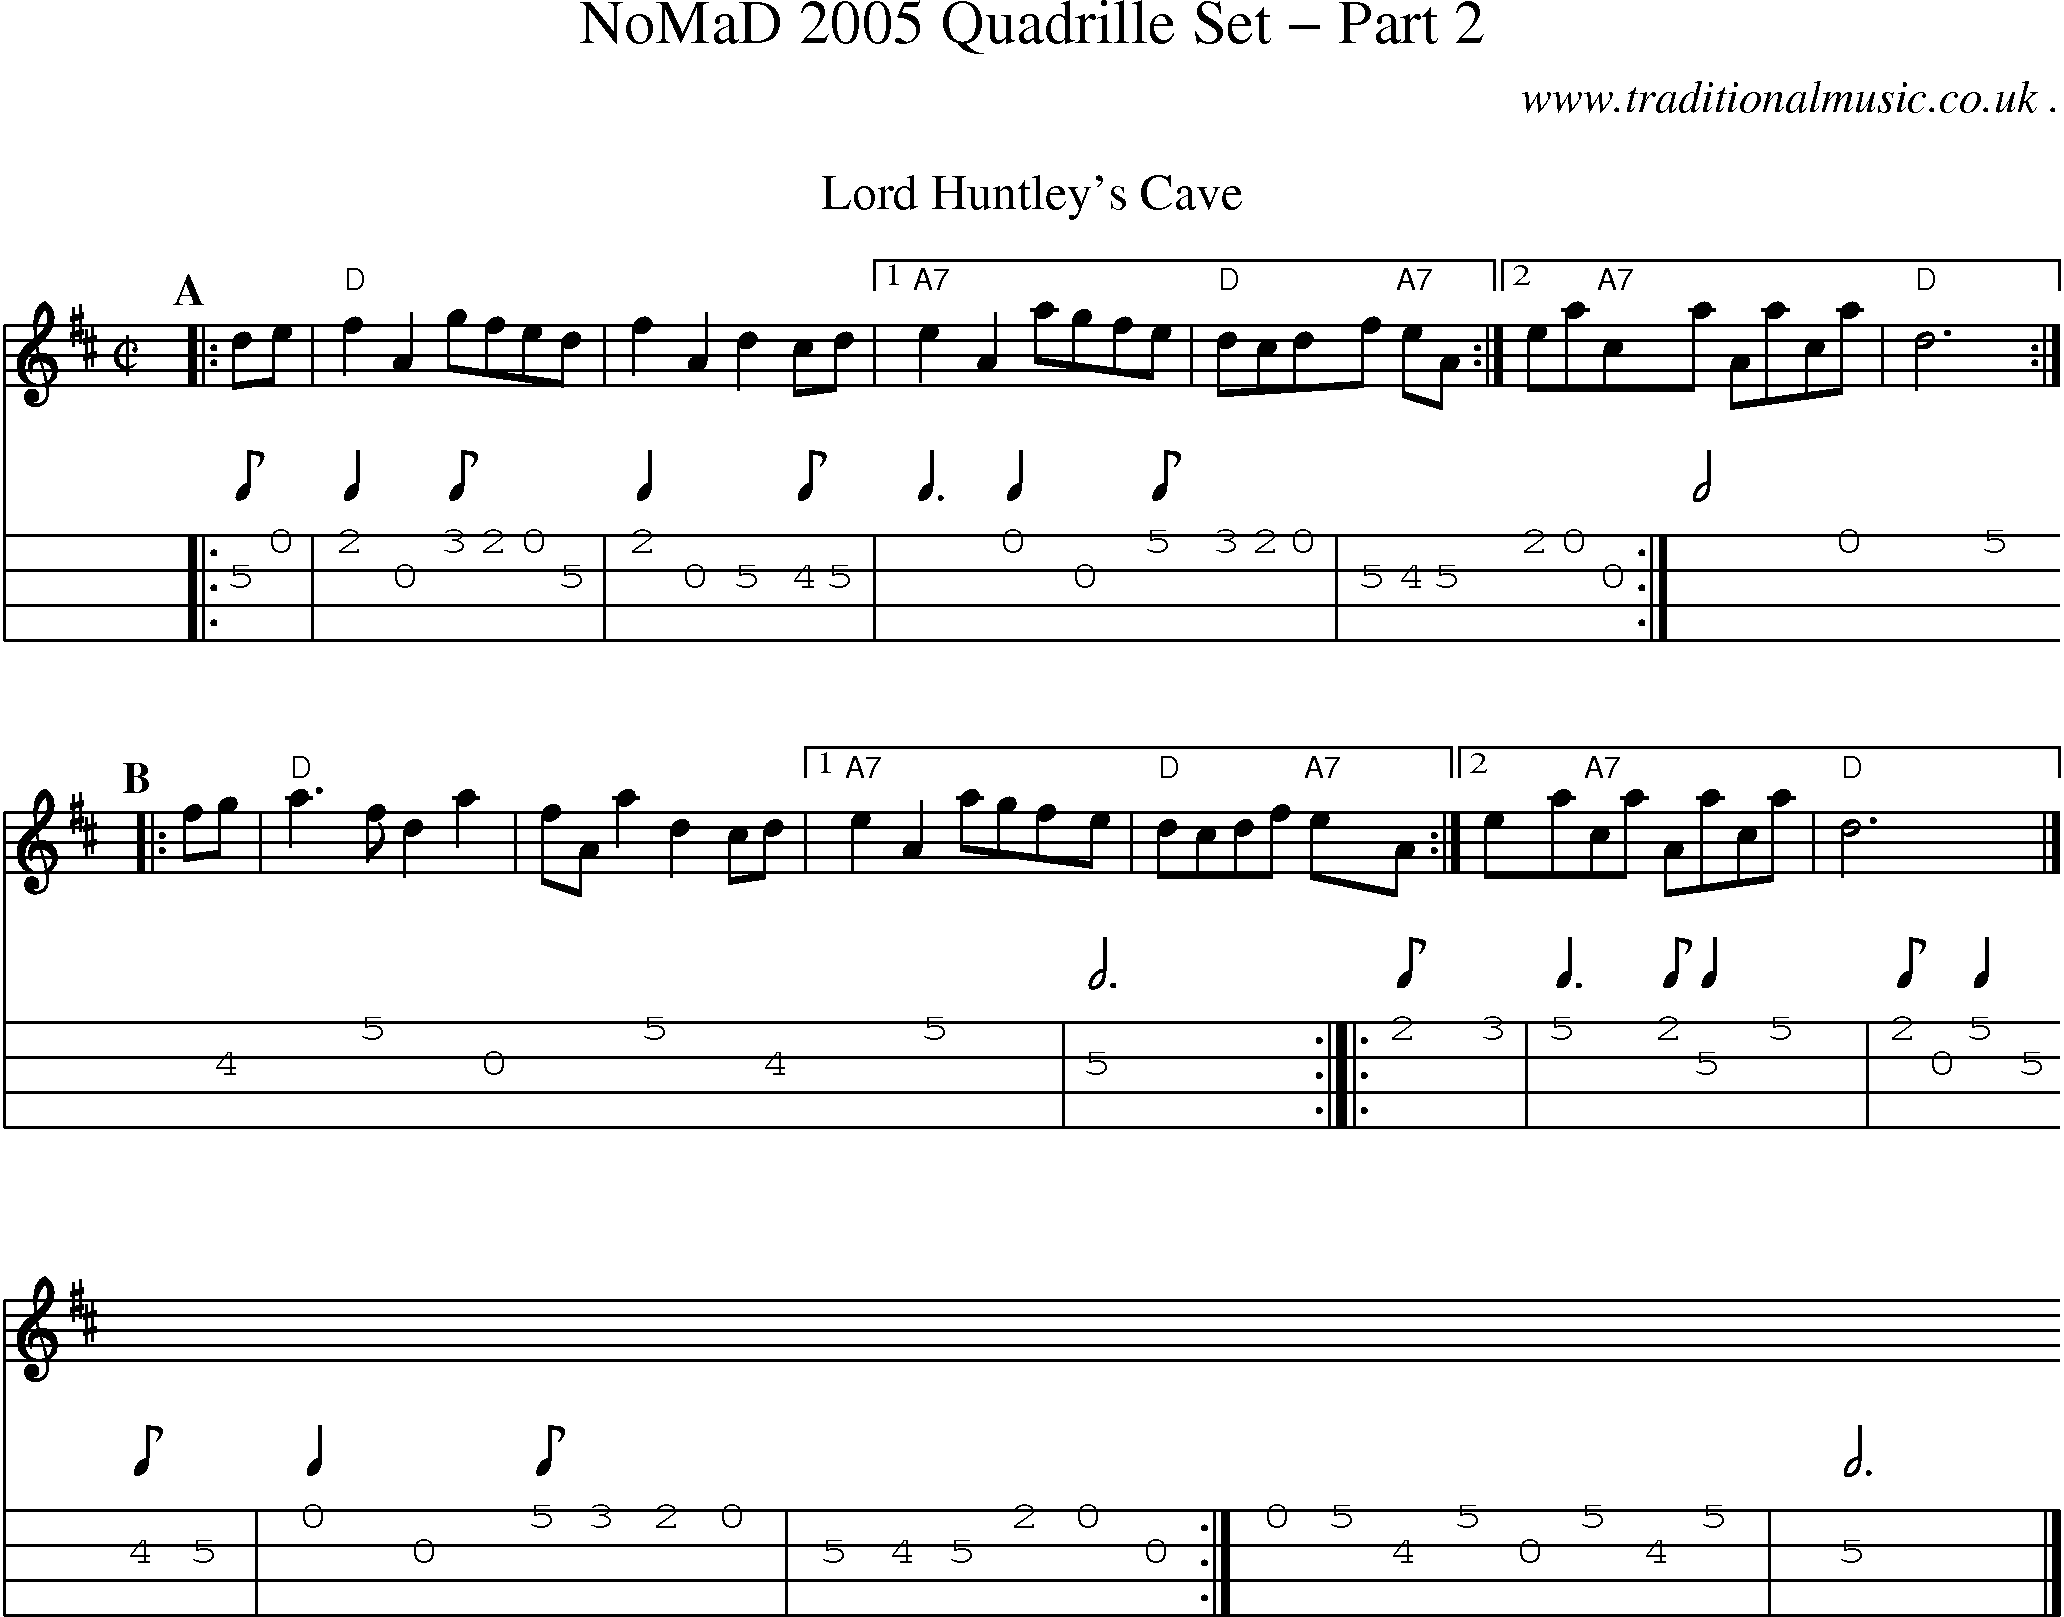 Sheet-music  score, Chords and Mandolin Tabs for Nomad 2005 Quadrille Set Part 2